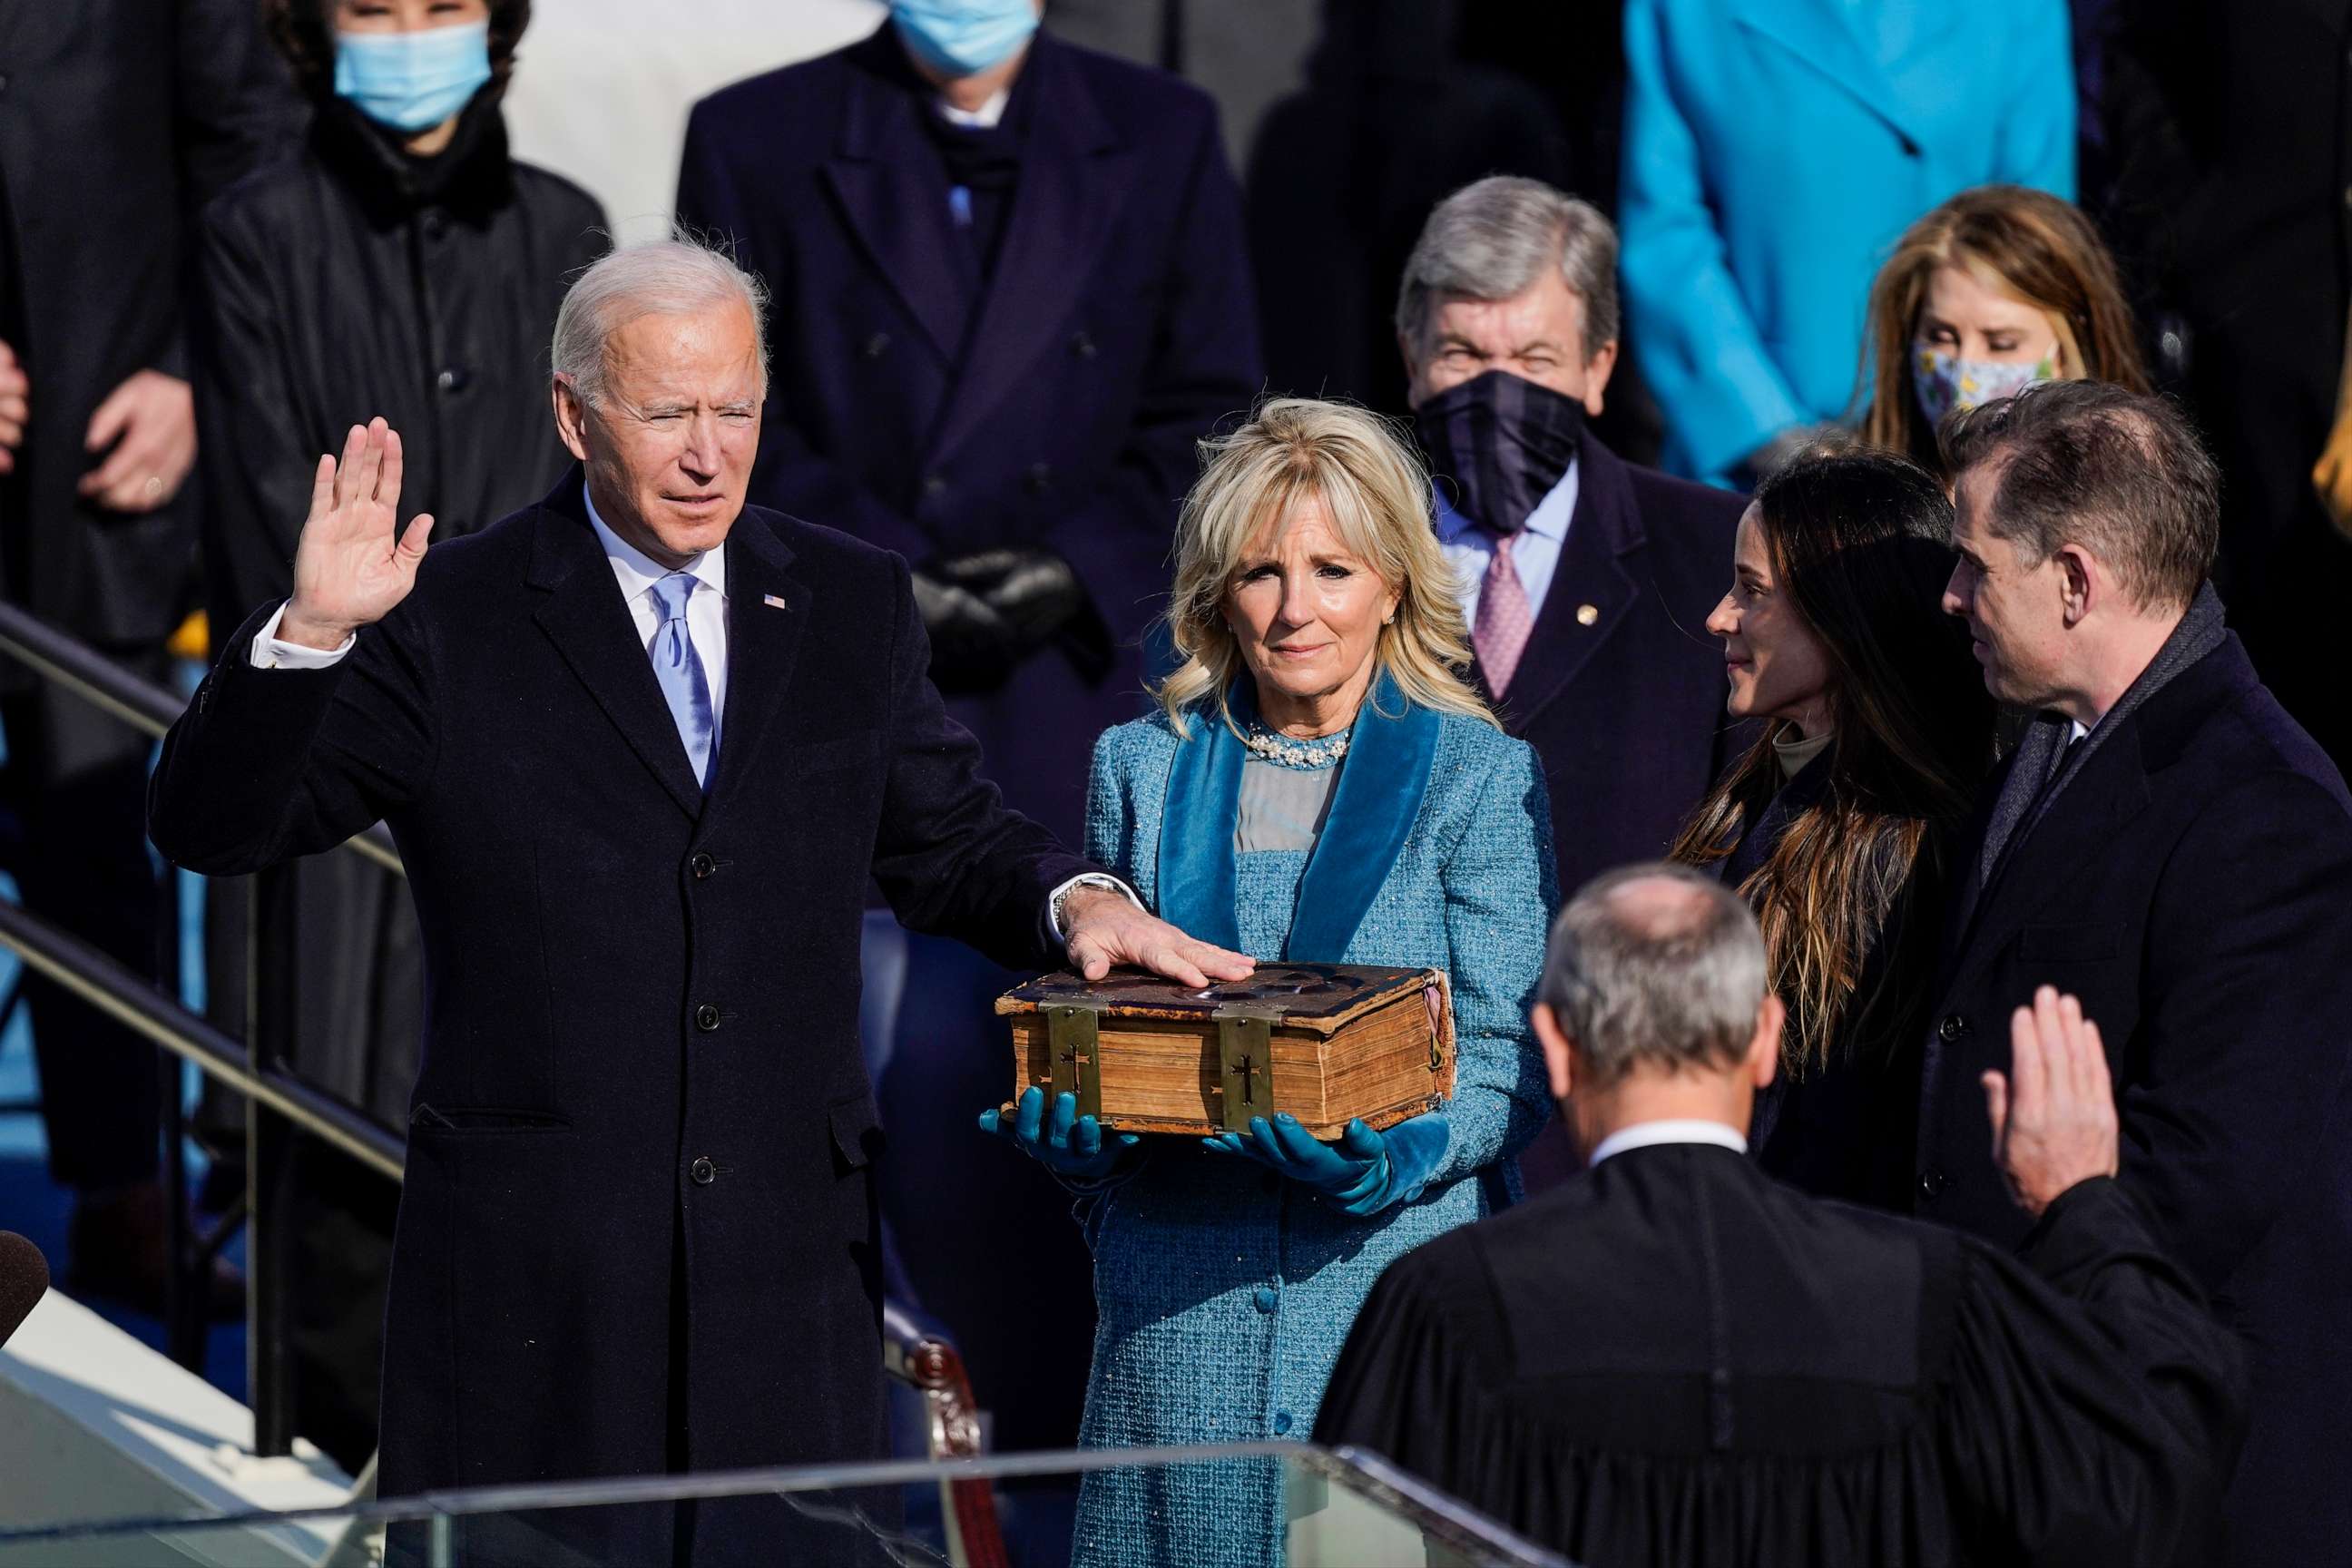 PHOTO: President-elect Joe Biden takes the oath of office from Supreme Court Chief Justice John Roberts as his wife First Lady-elect Jill Biden stands next to him during the 59th presidential inauguration in Washington, Jan. 20, 2021.